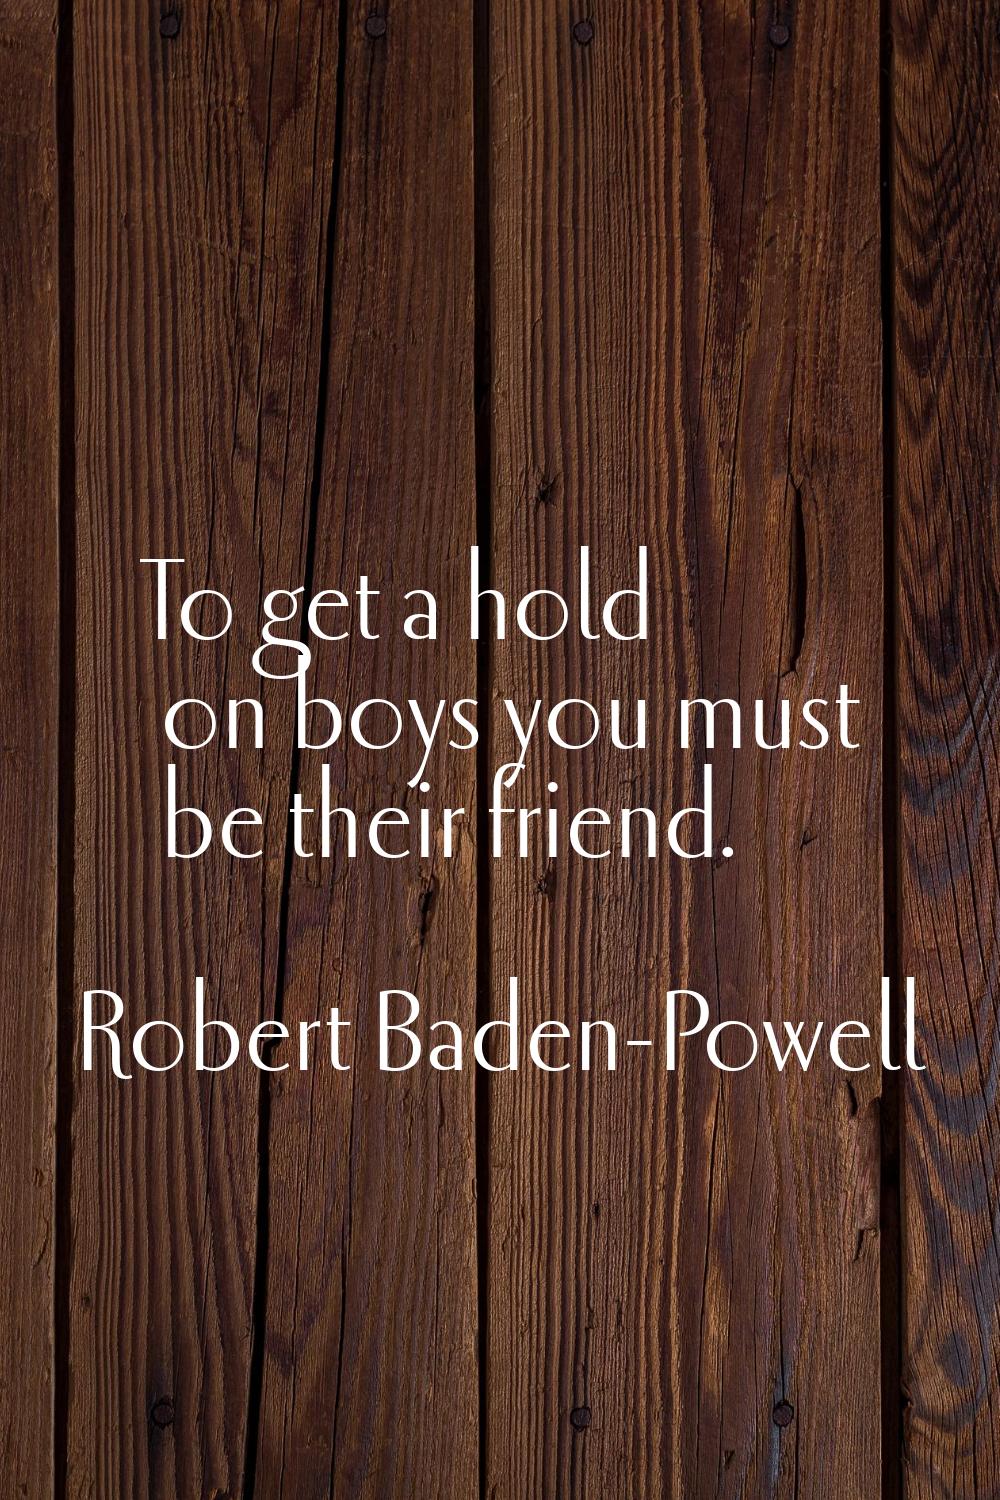 To get a hold on boys you must be their friend.